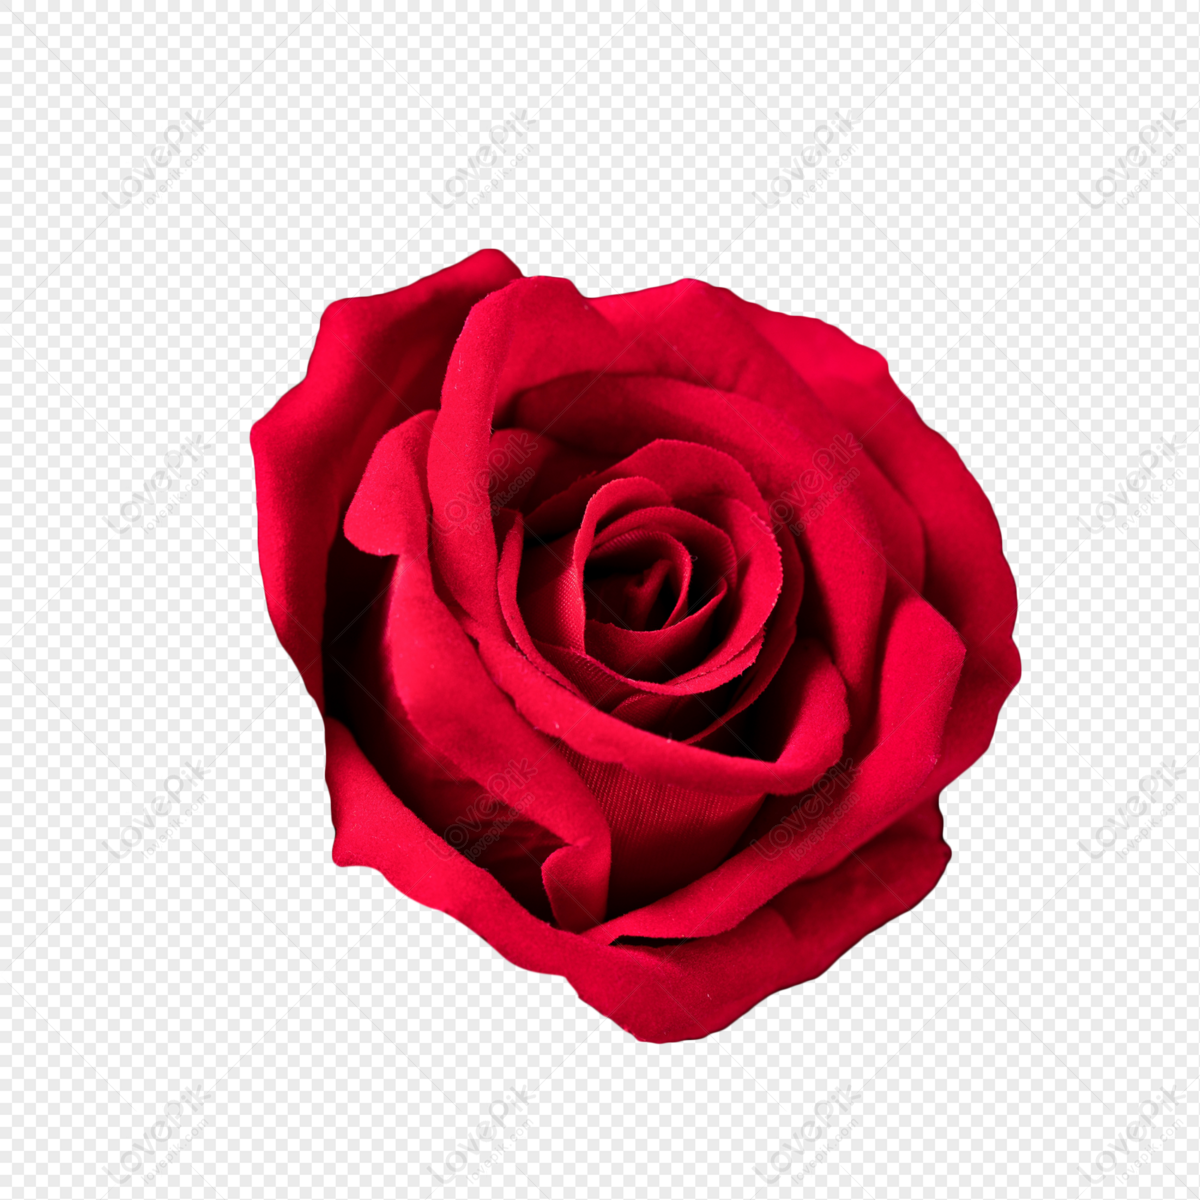 Neon Rose Images  Free Photos, PNG Stickers, Wallpapers